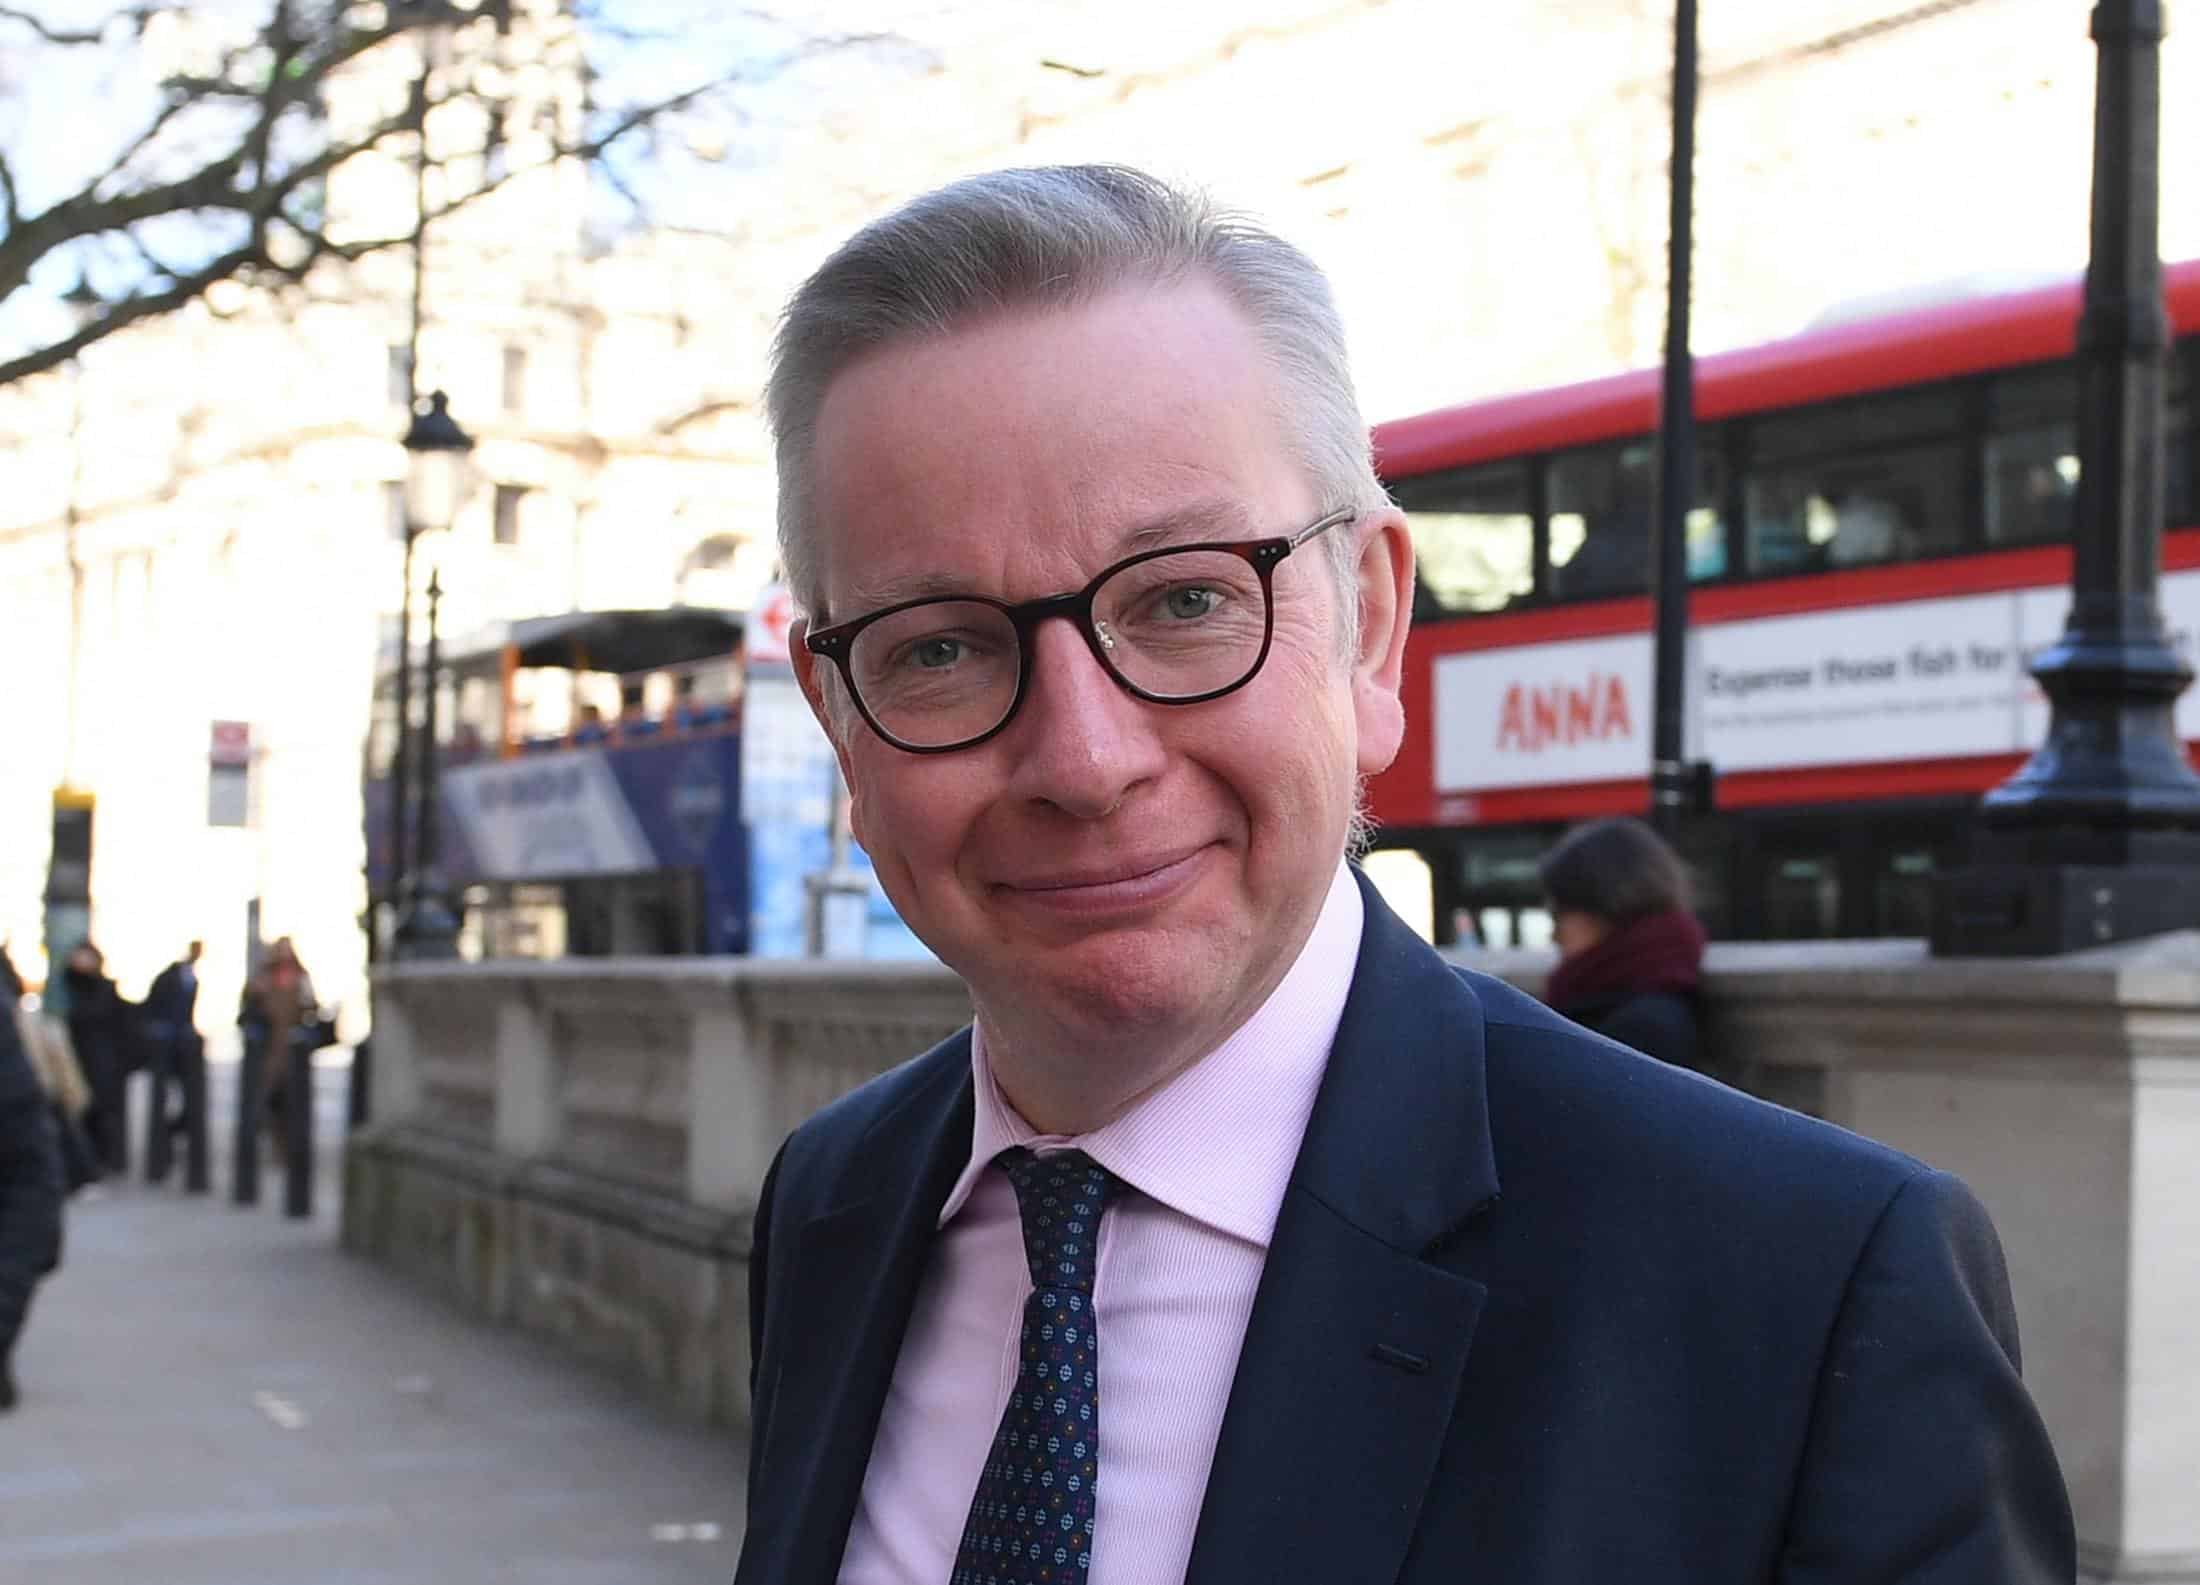 Brexit: Gove travels to Brussels after last talks ended in legal threat and have ‘eroded trust’